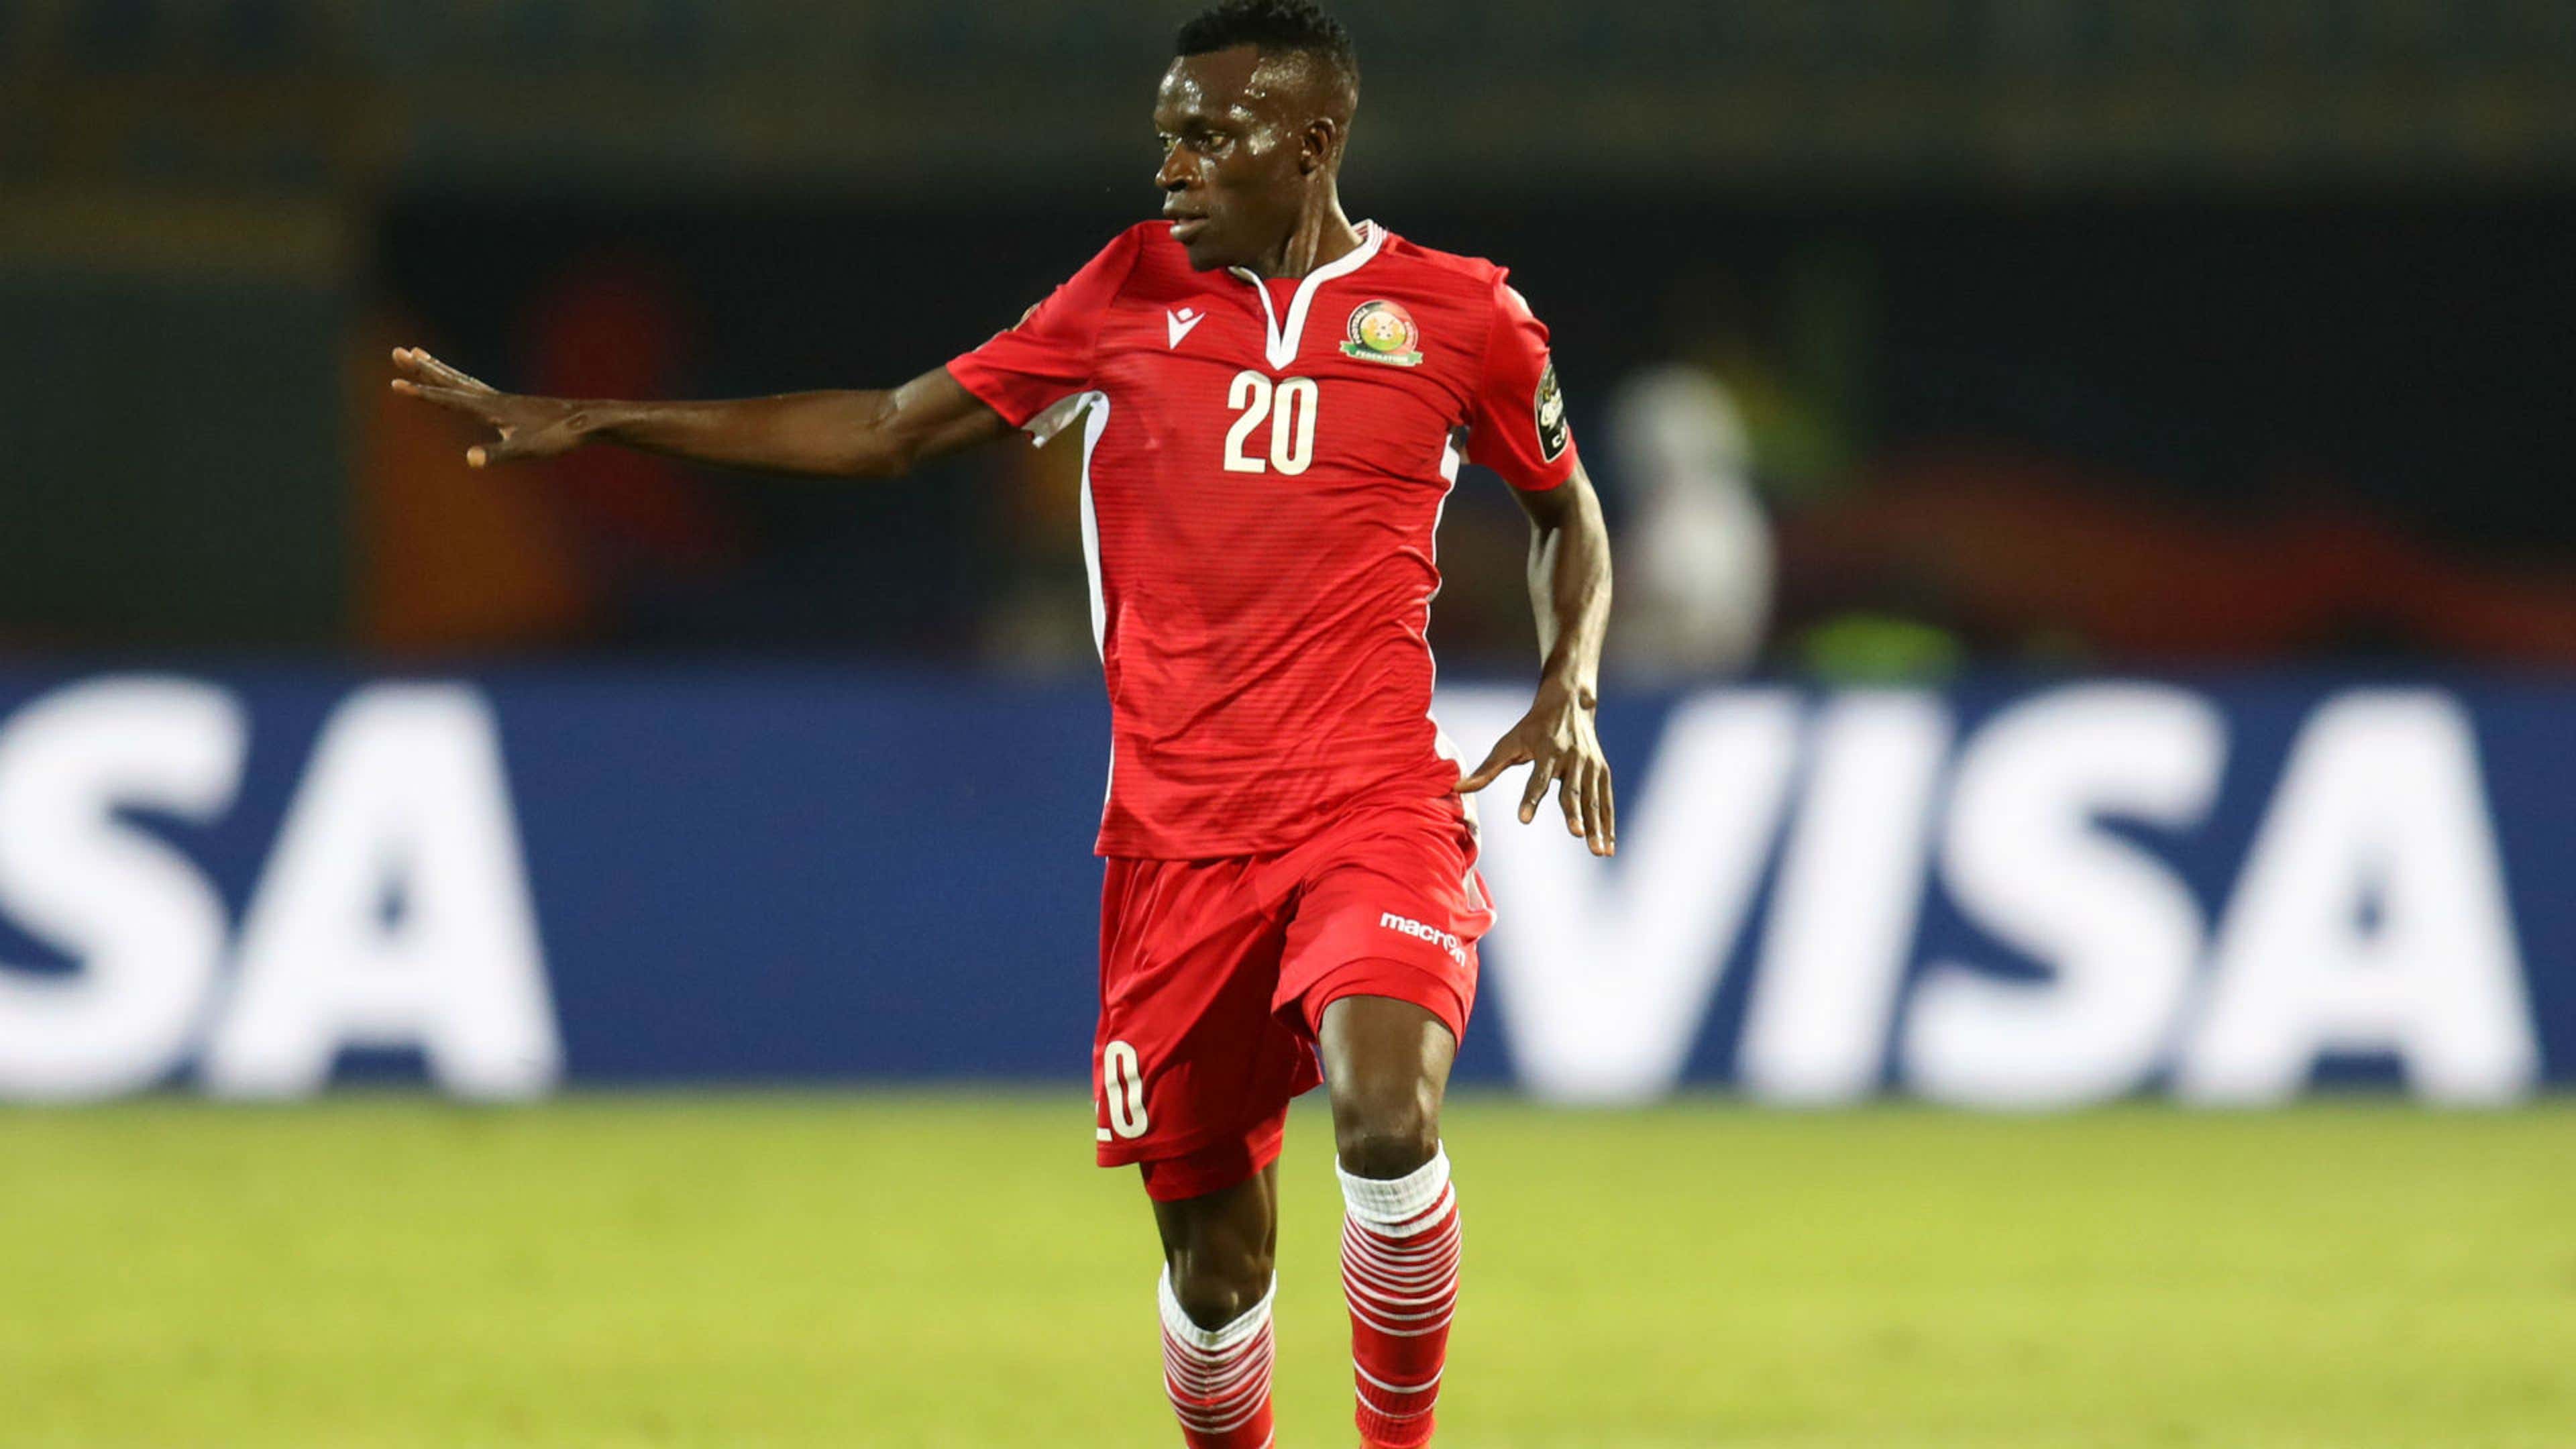 Philemon Otieno of Kenya during the 2019 Africa Cup of Nations Finals.